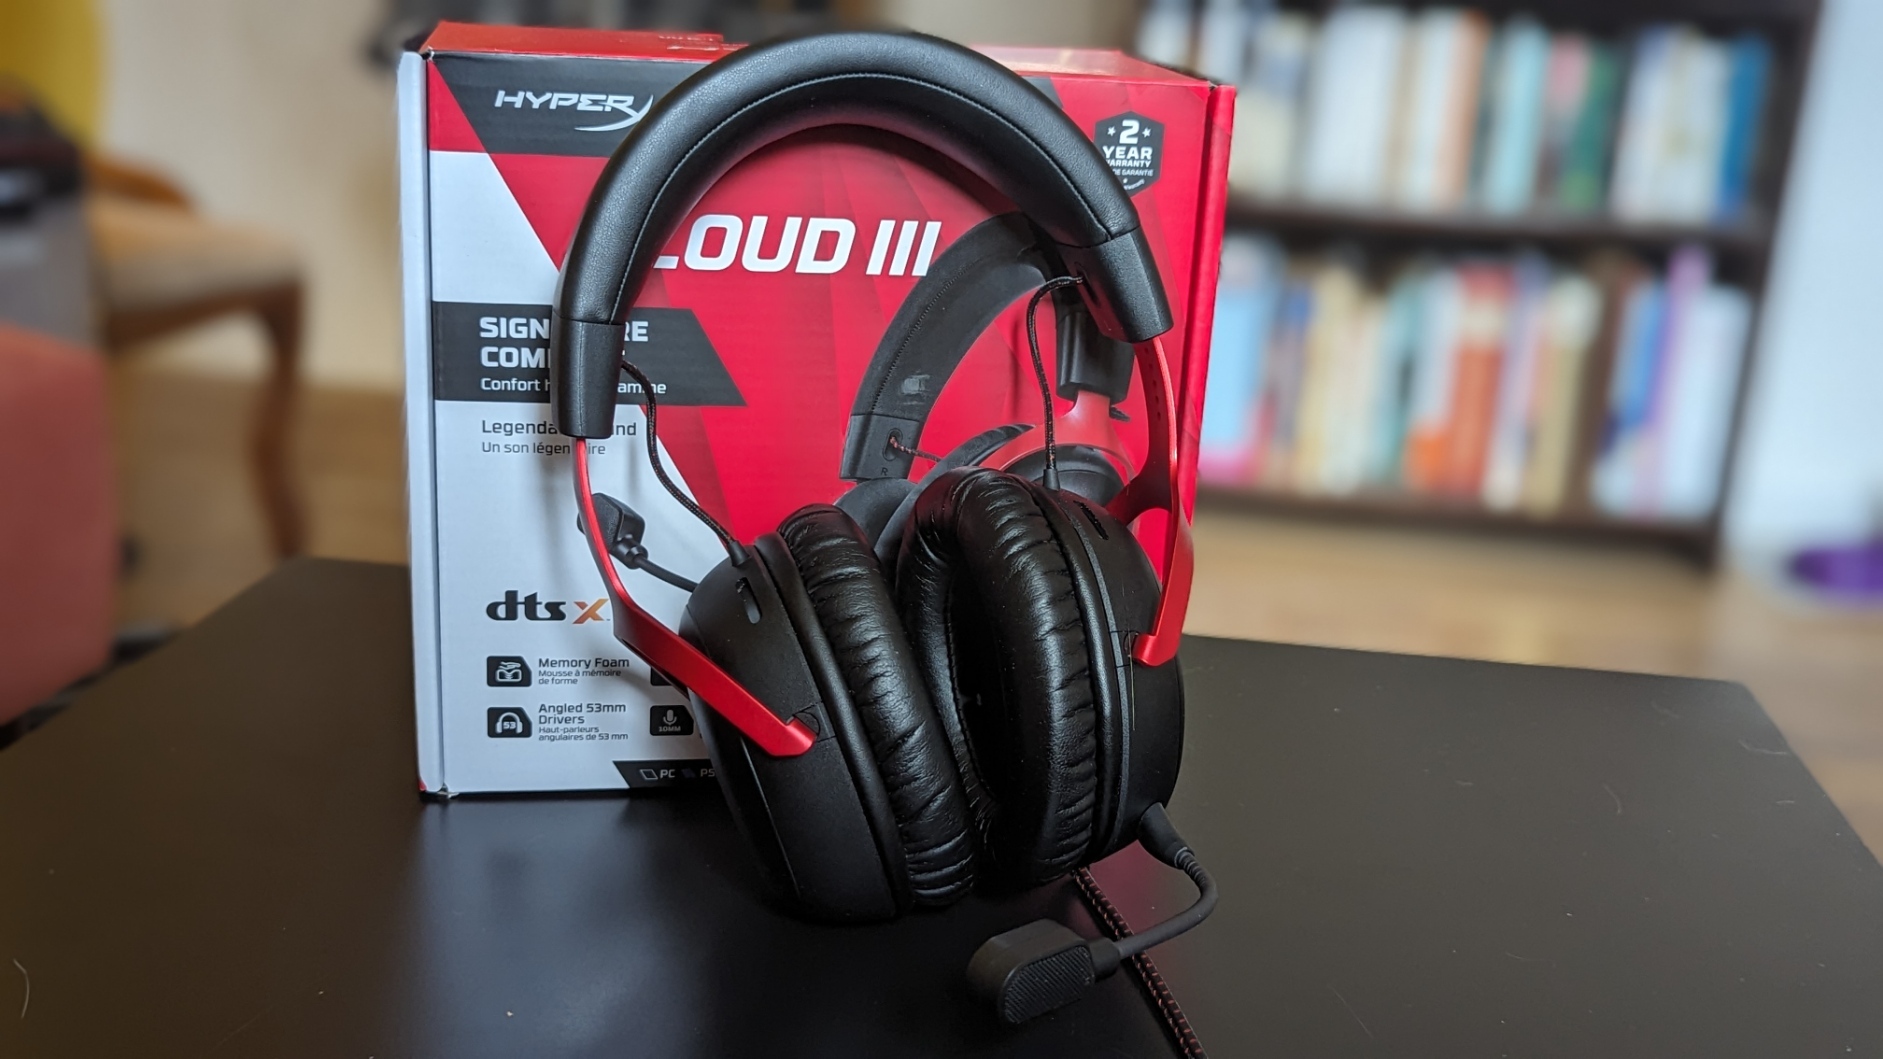 HyperX Cloud 3 Wireless Review: Great sound and comfort